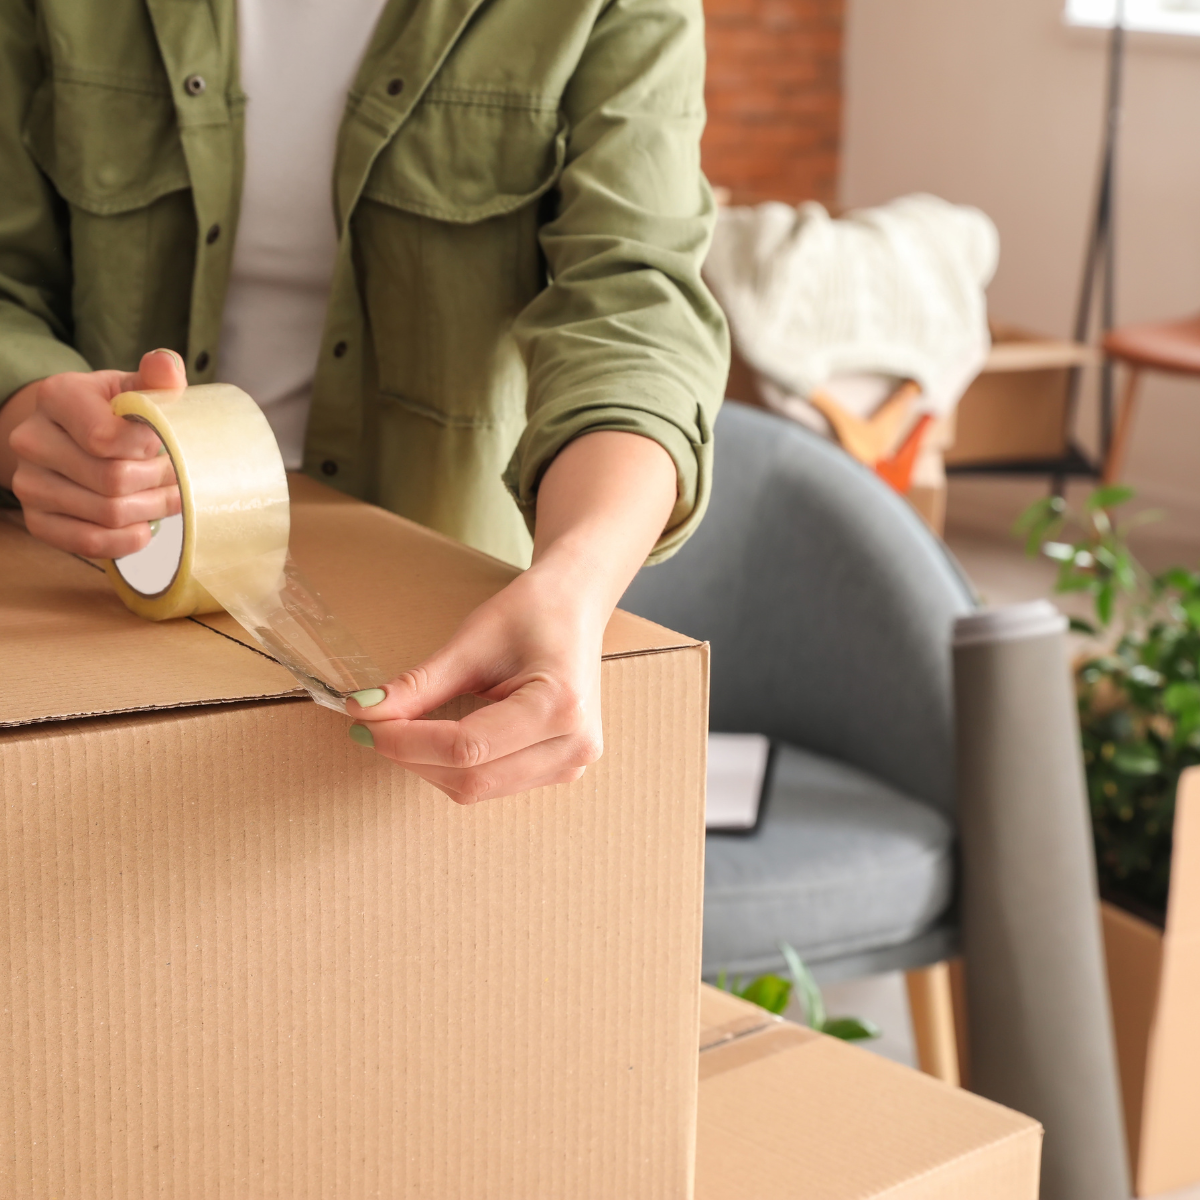 High Value Inventory: What it Is and How to Protect Yours During a Move